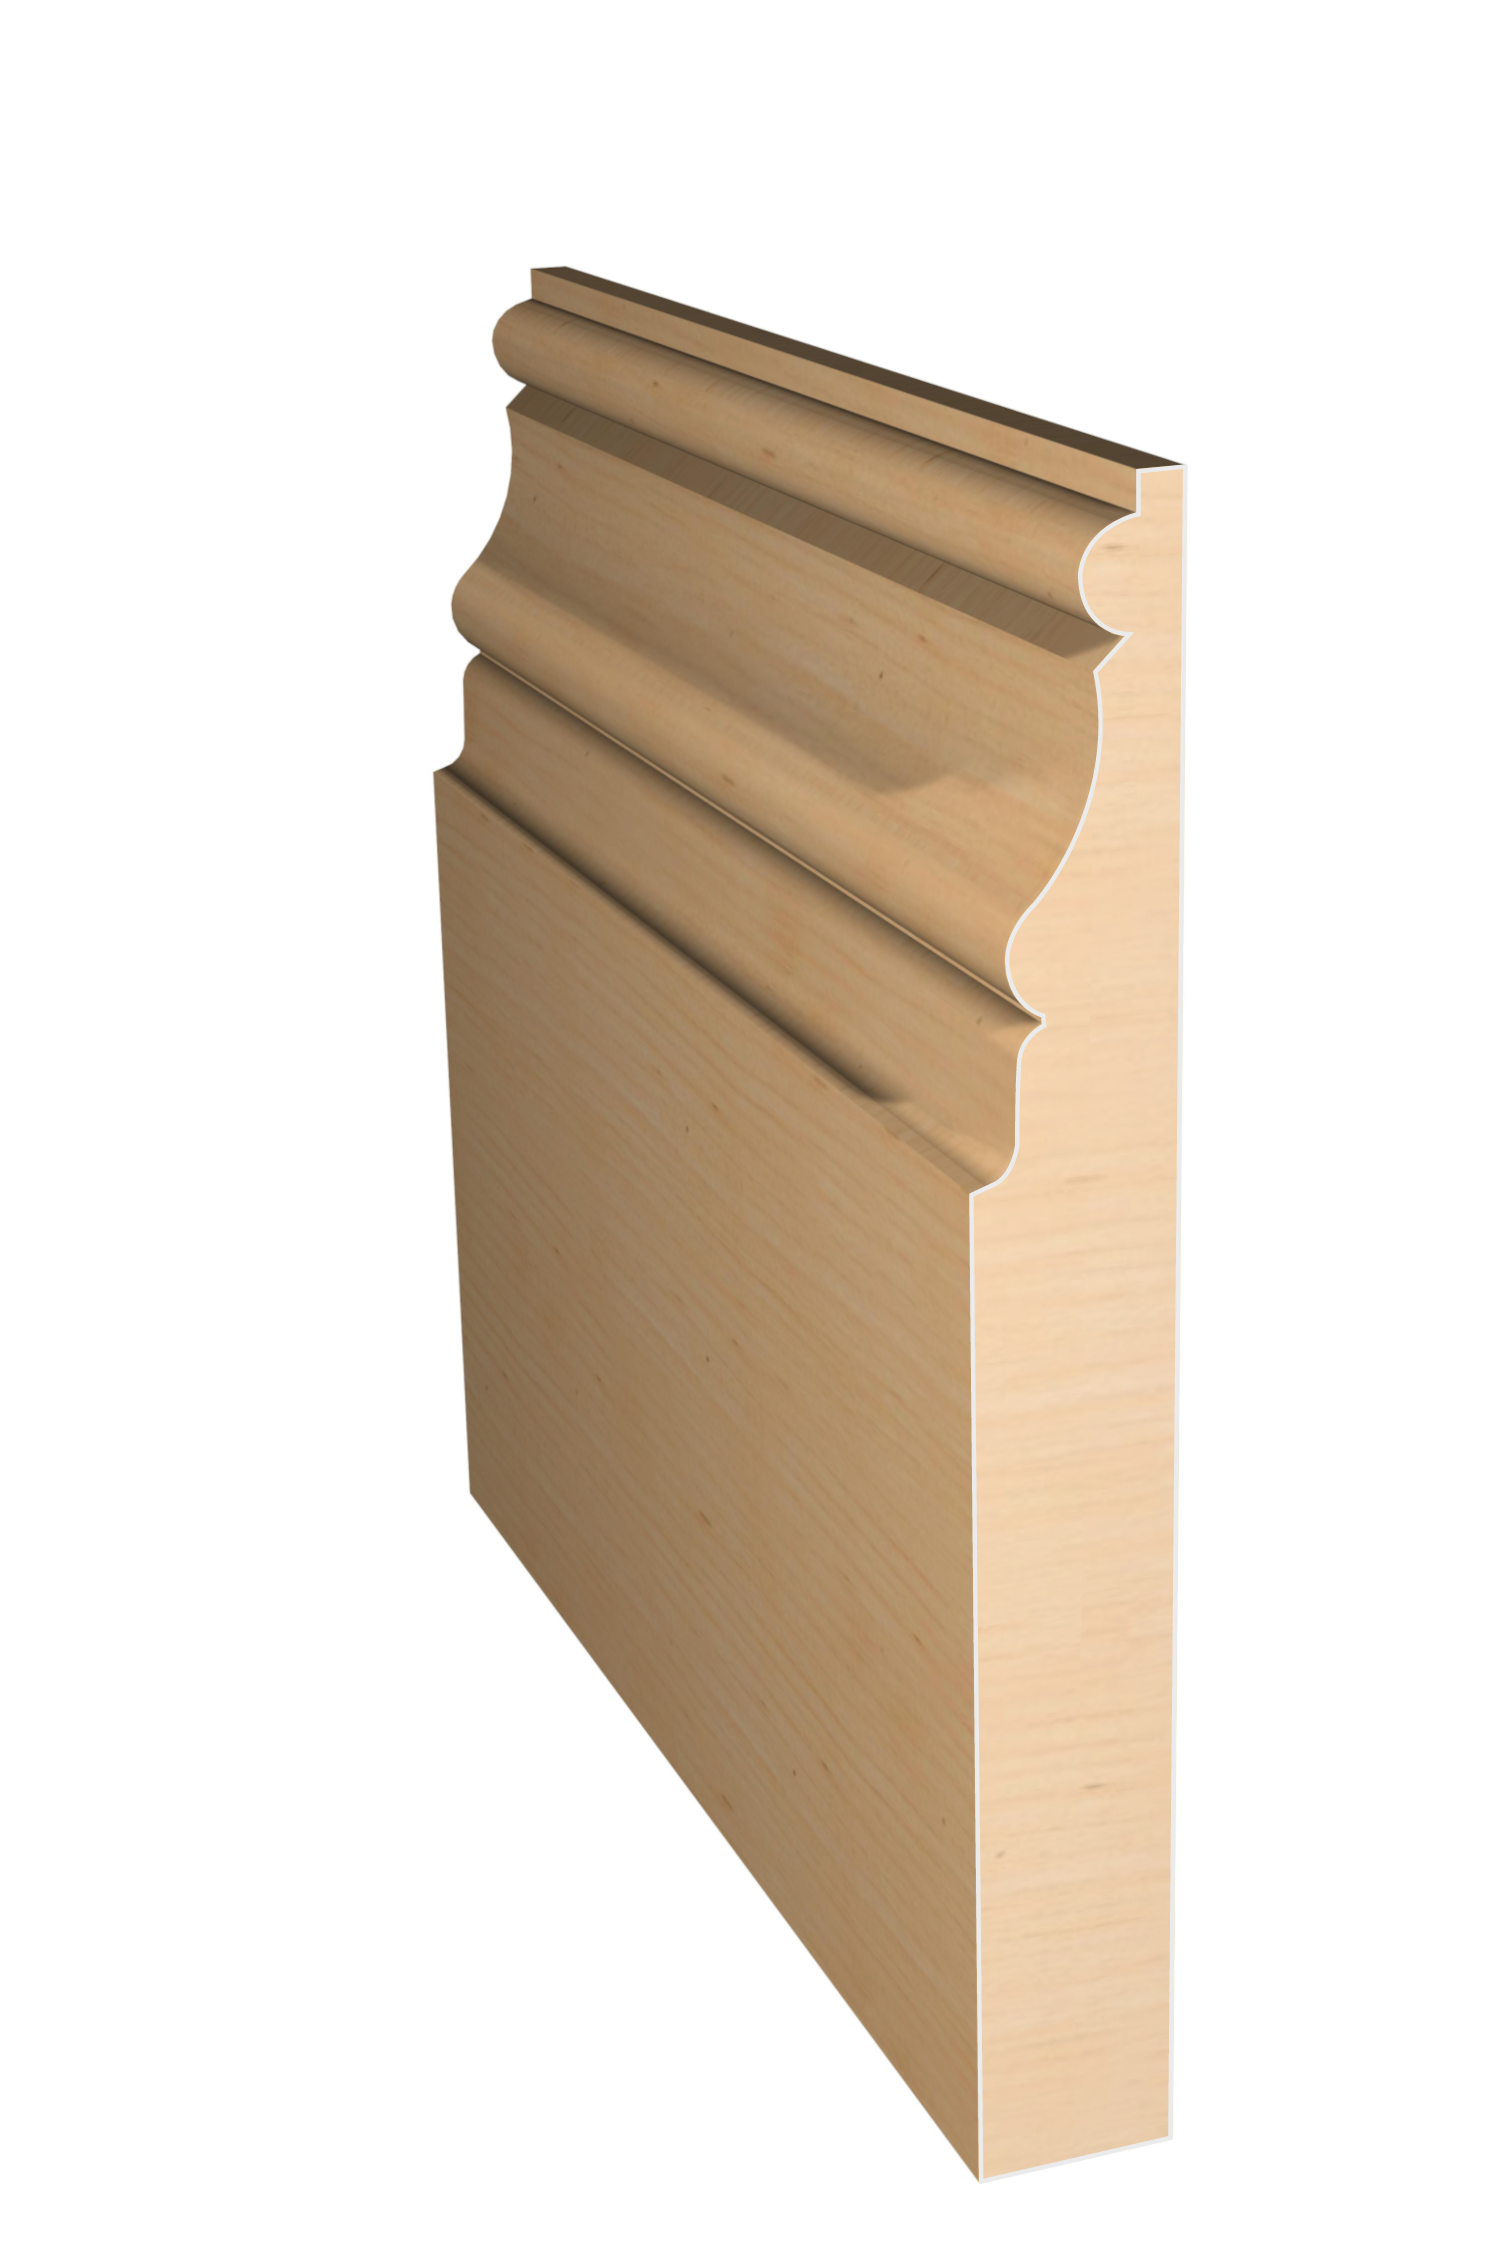 Three dimensional rendering of custom base wood molding BAPL51228 made by Public Lumber Company in Detroit.